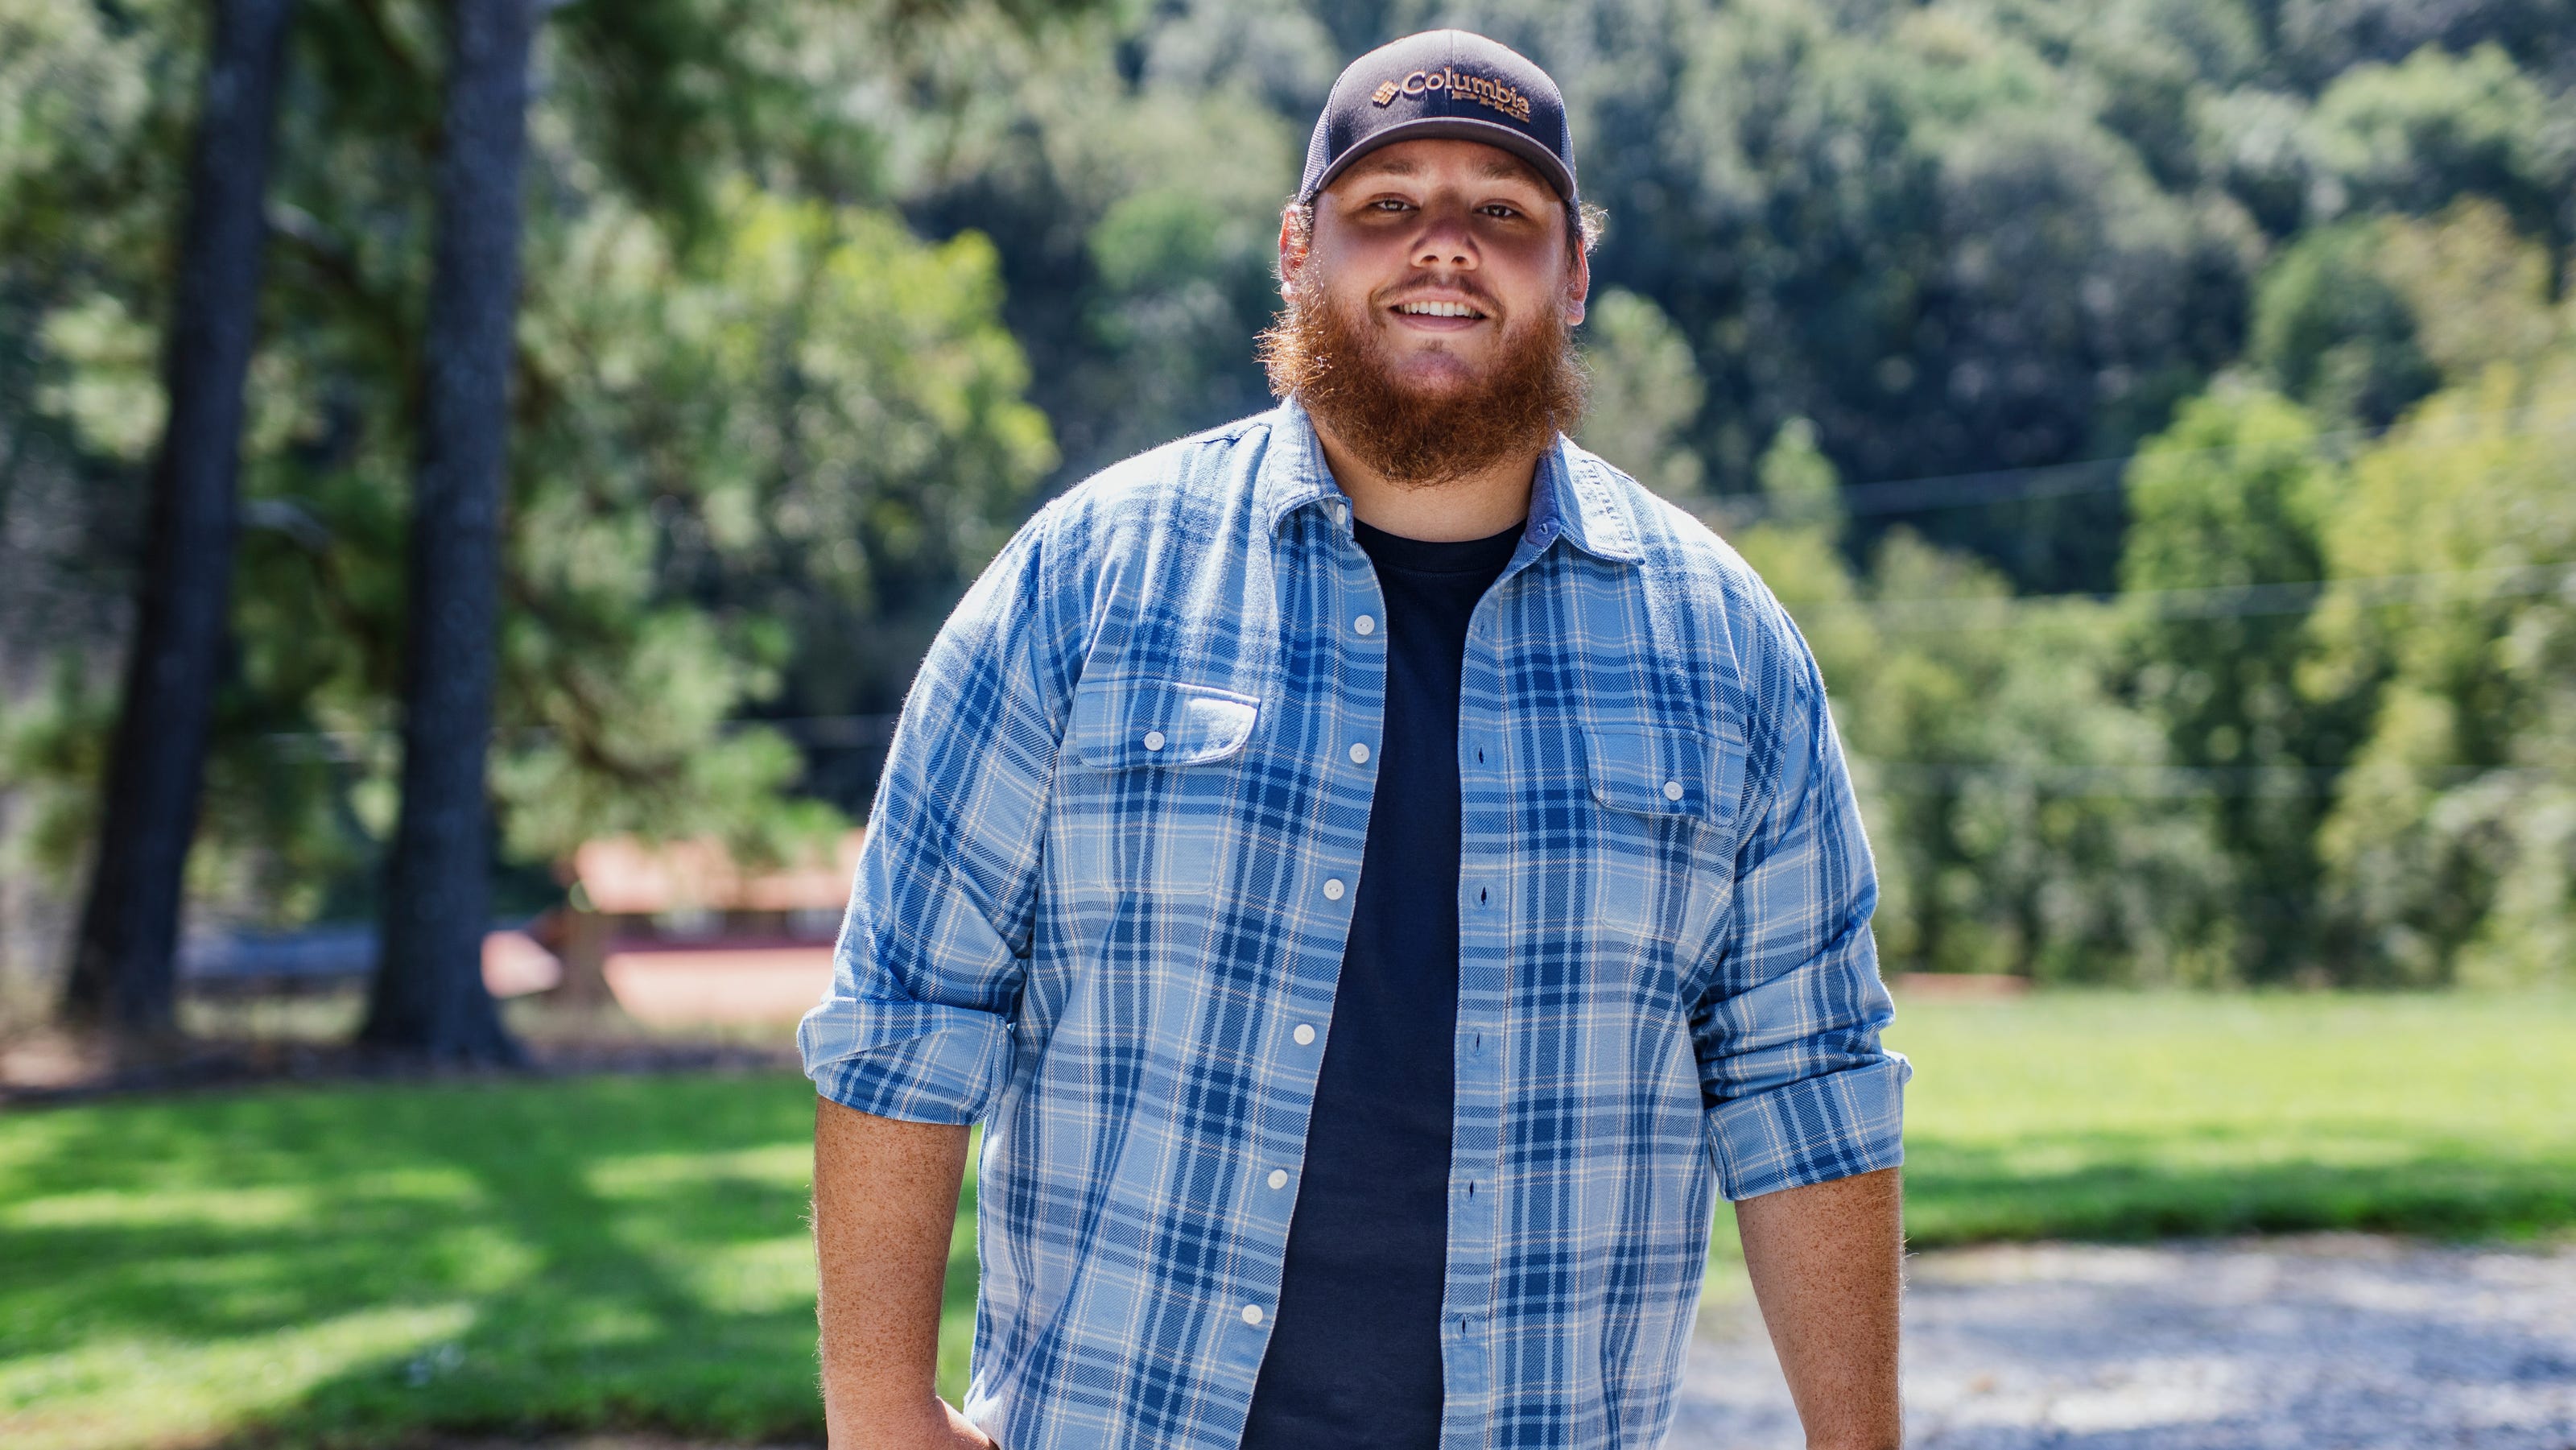 Luke Combs could land in the country music history books (again)